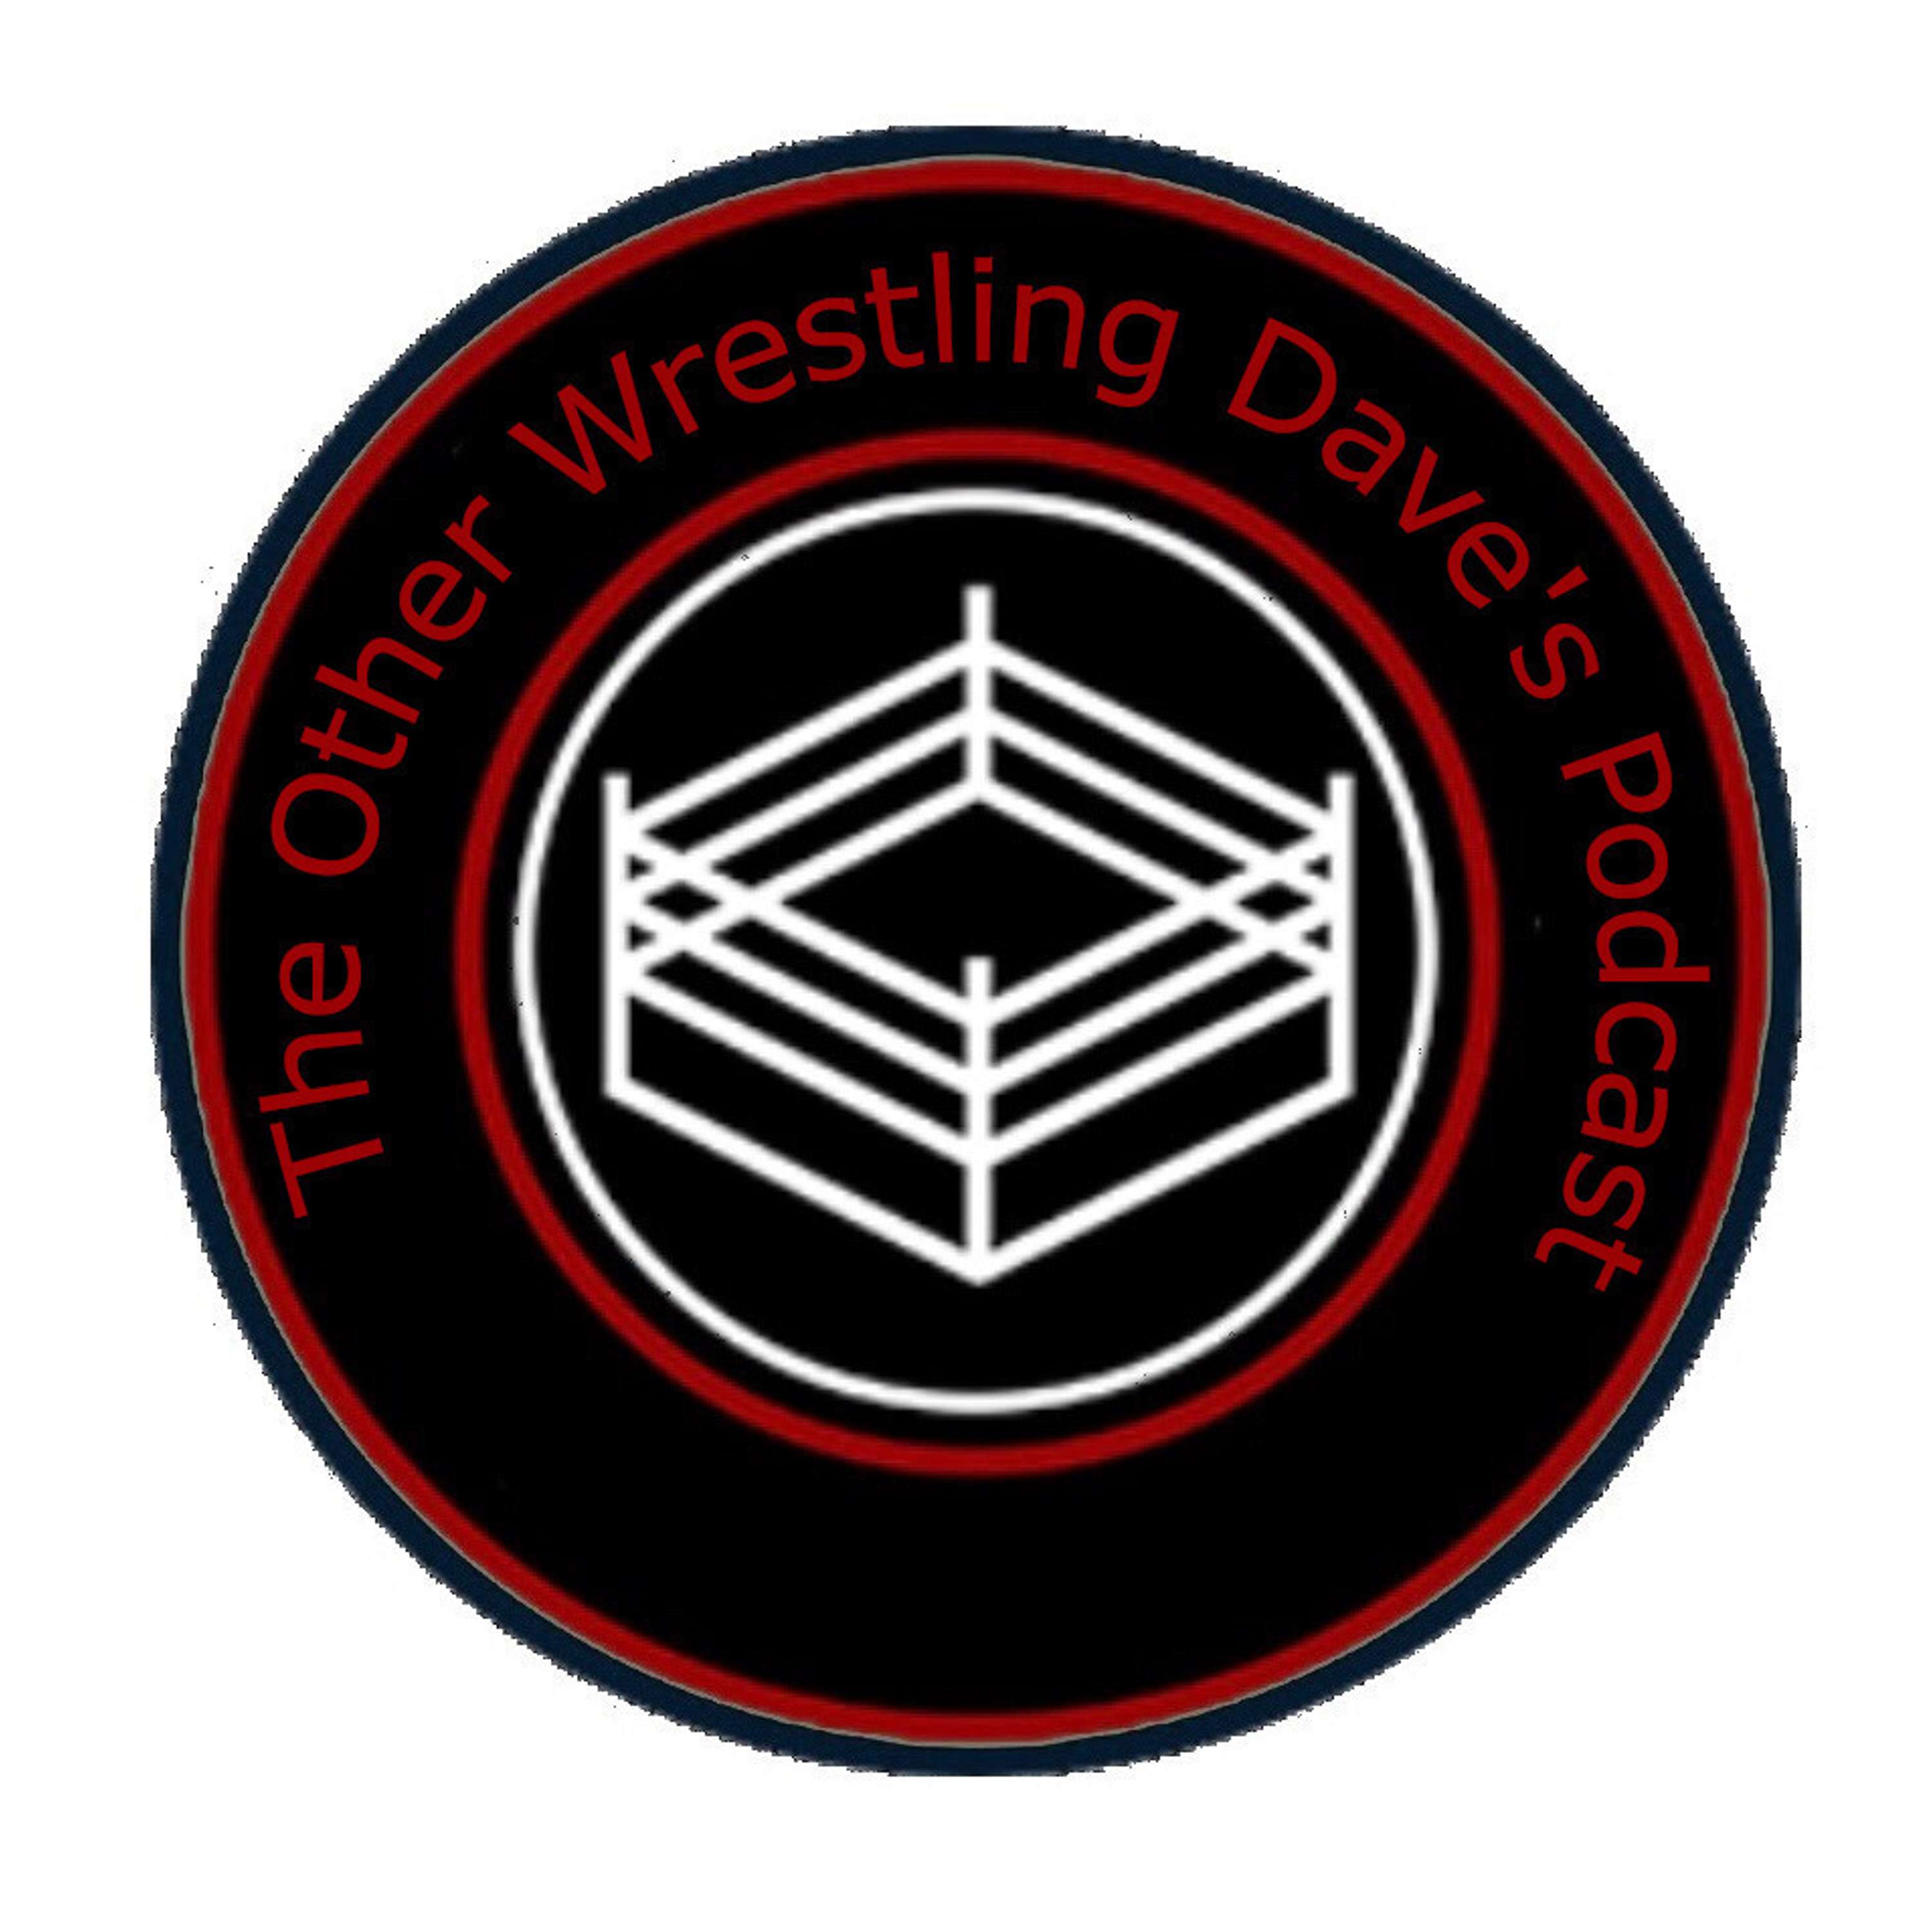 The Other Wrestling Dave's Podcast